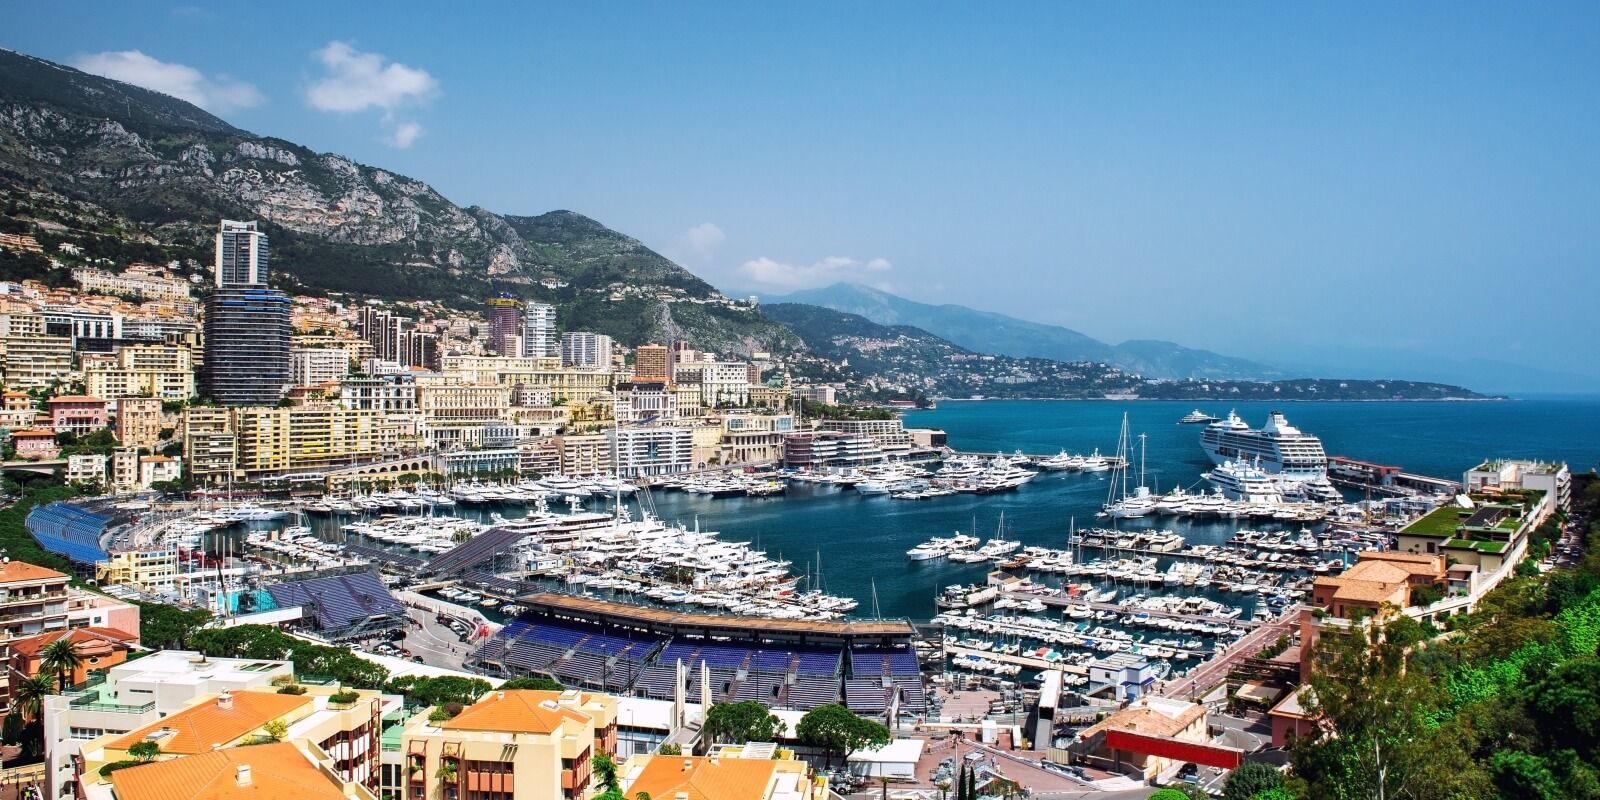 https://www.talamare.com/medias/View of Port Hercule with charter yachts during the Monaco Grand Prix